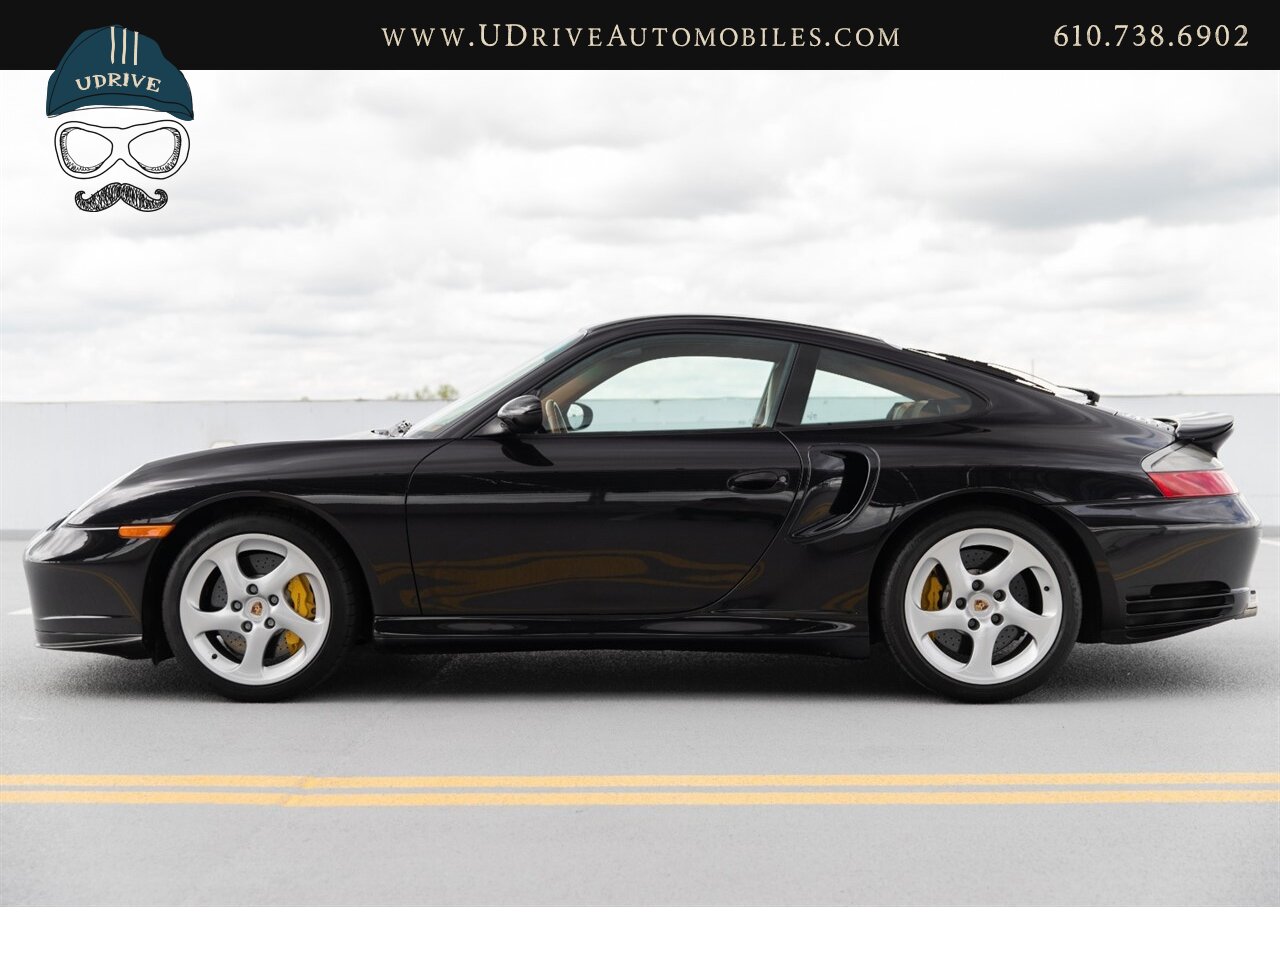 2005 Porsche 911 Turbo S 6 Speed 14k Miles Sport Sts Painted Backs  Natural Brown Lthr $144,070 MSRP - Photo 7 - West Chester, PA 19382